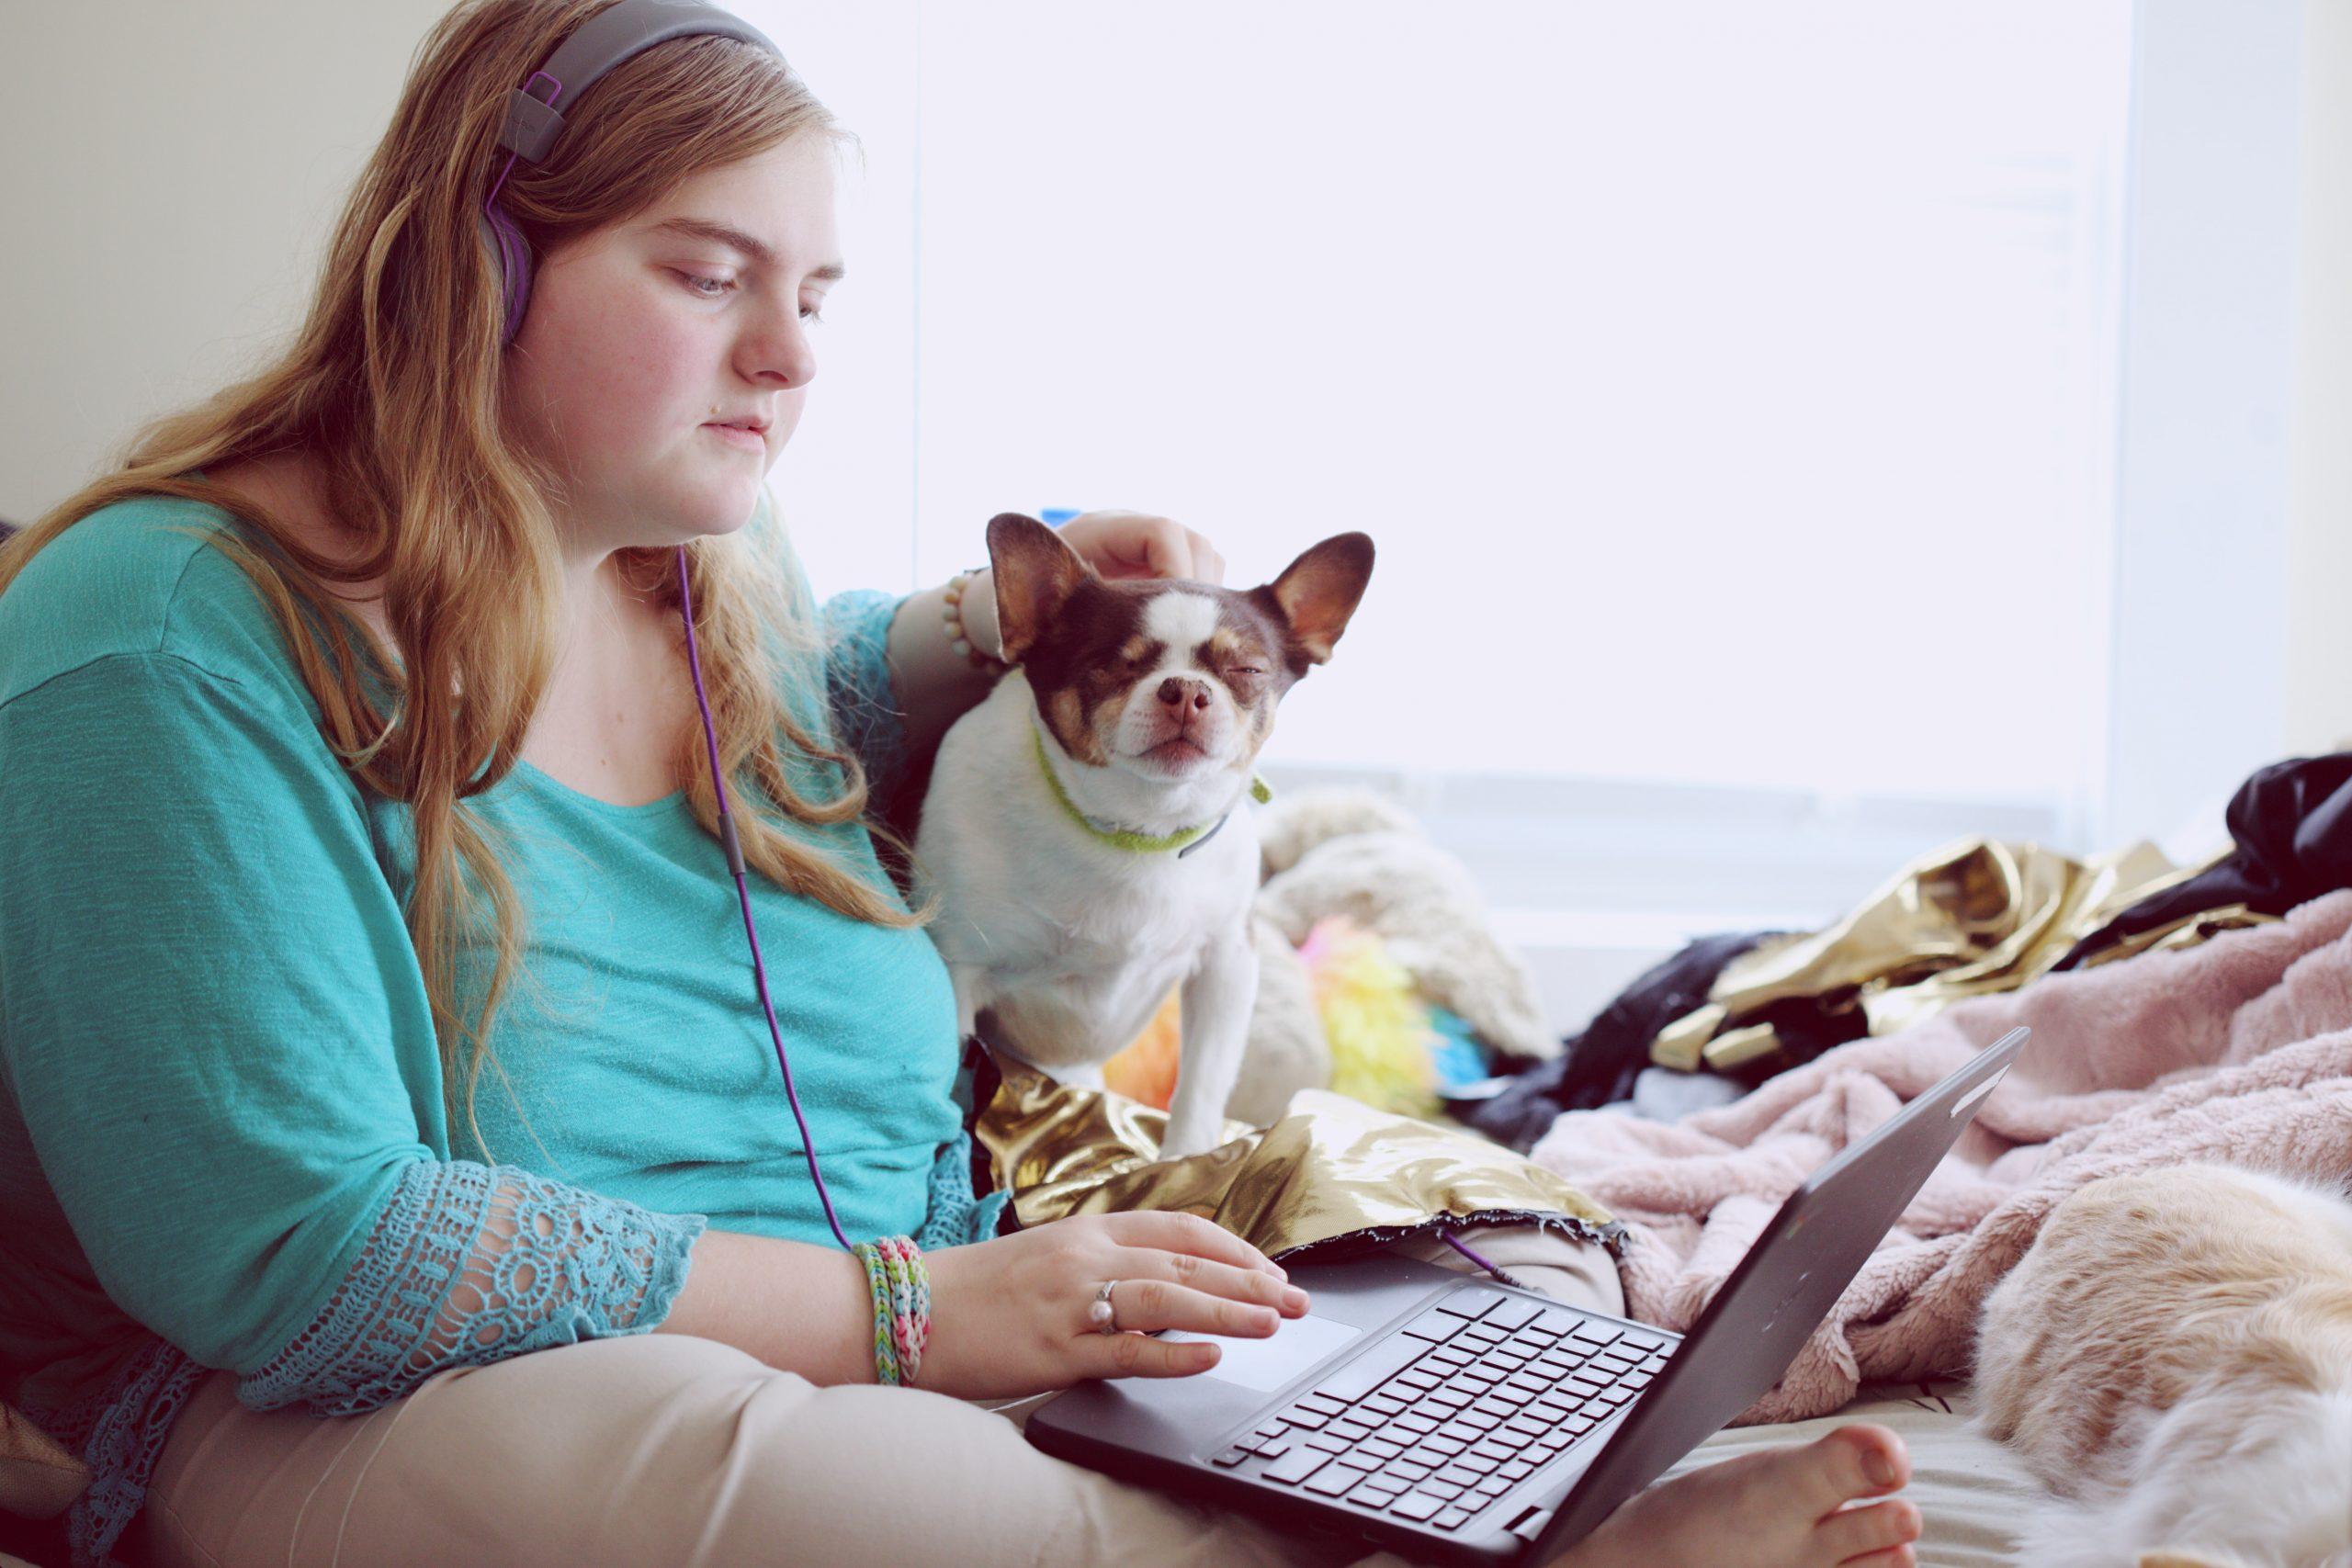 Young woman with autism using her laptop with dog beside her